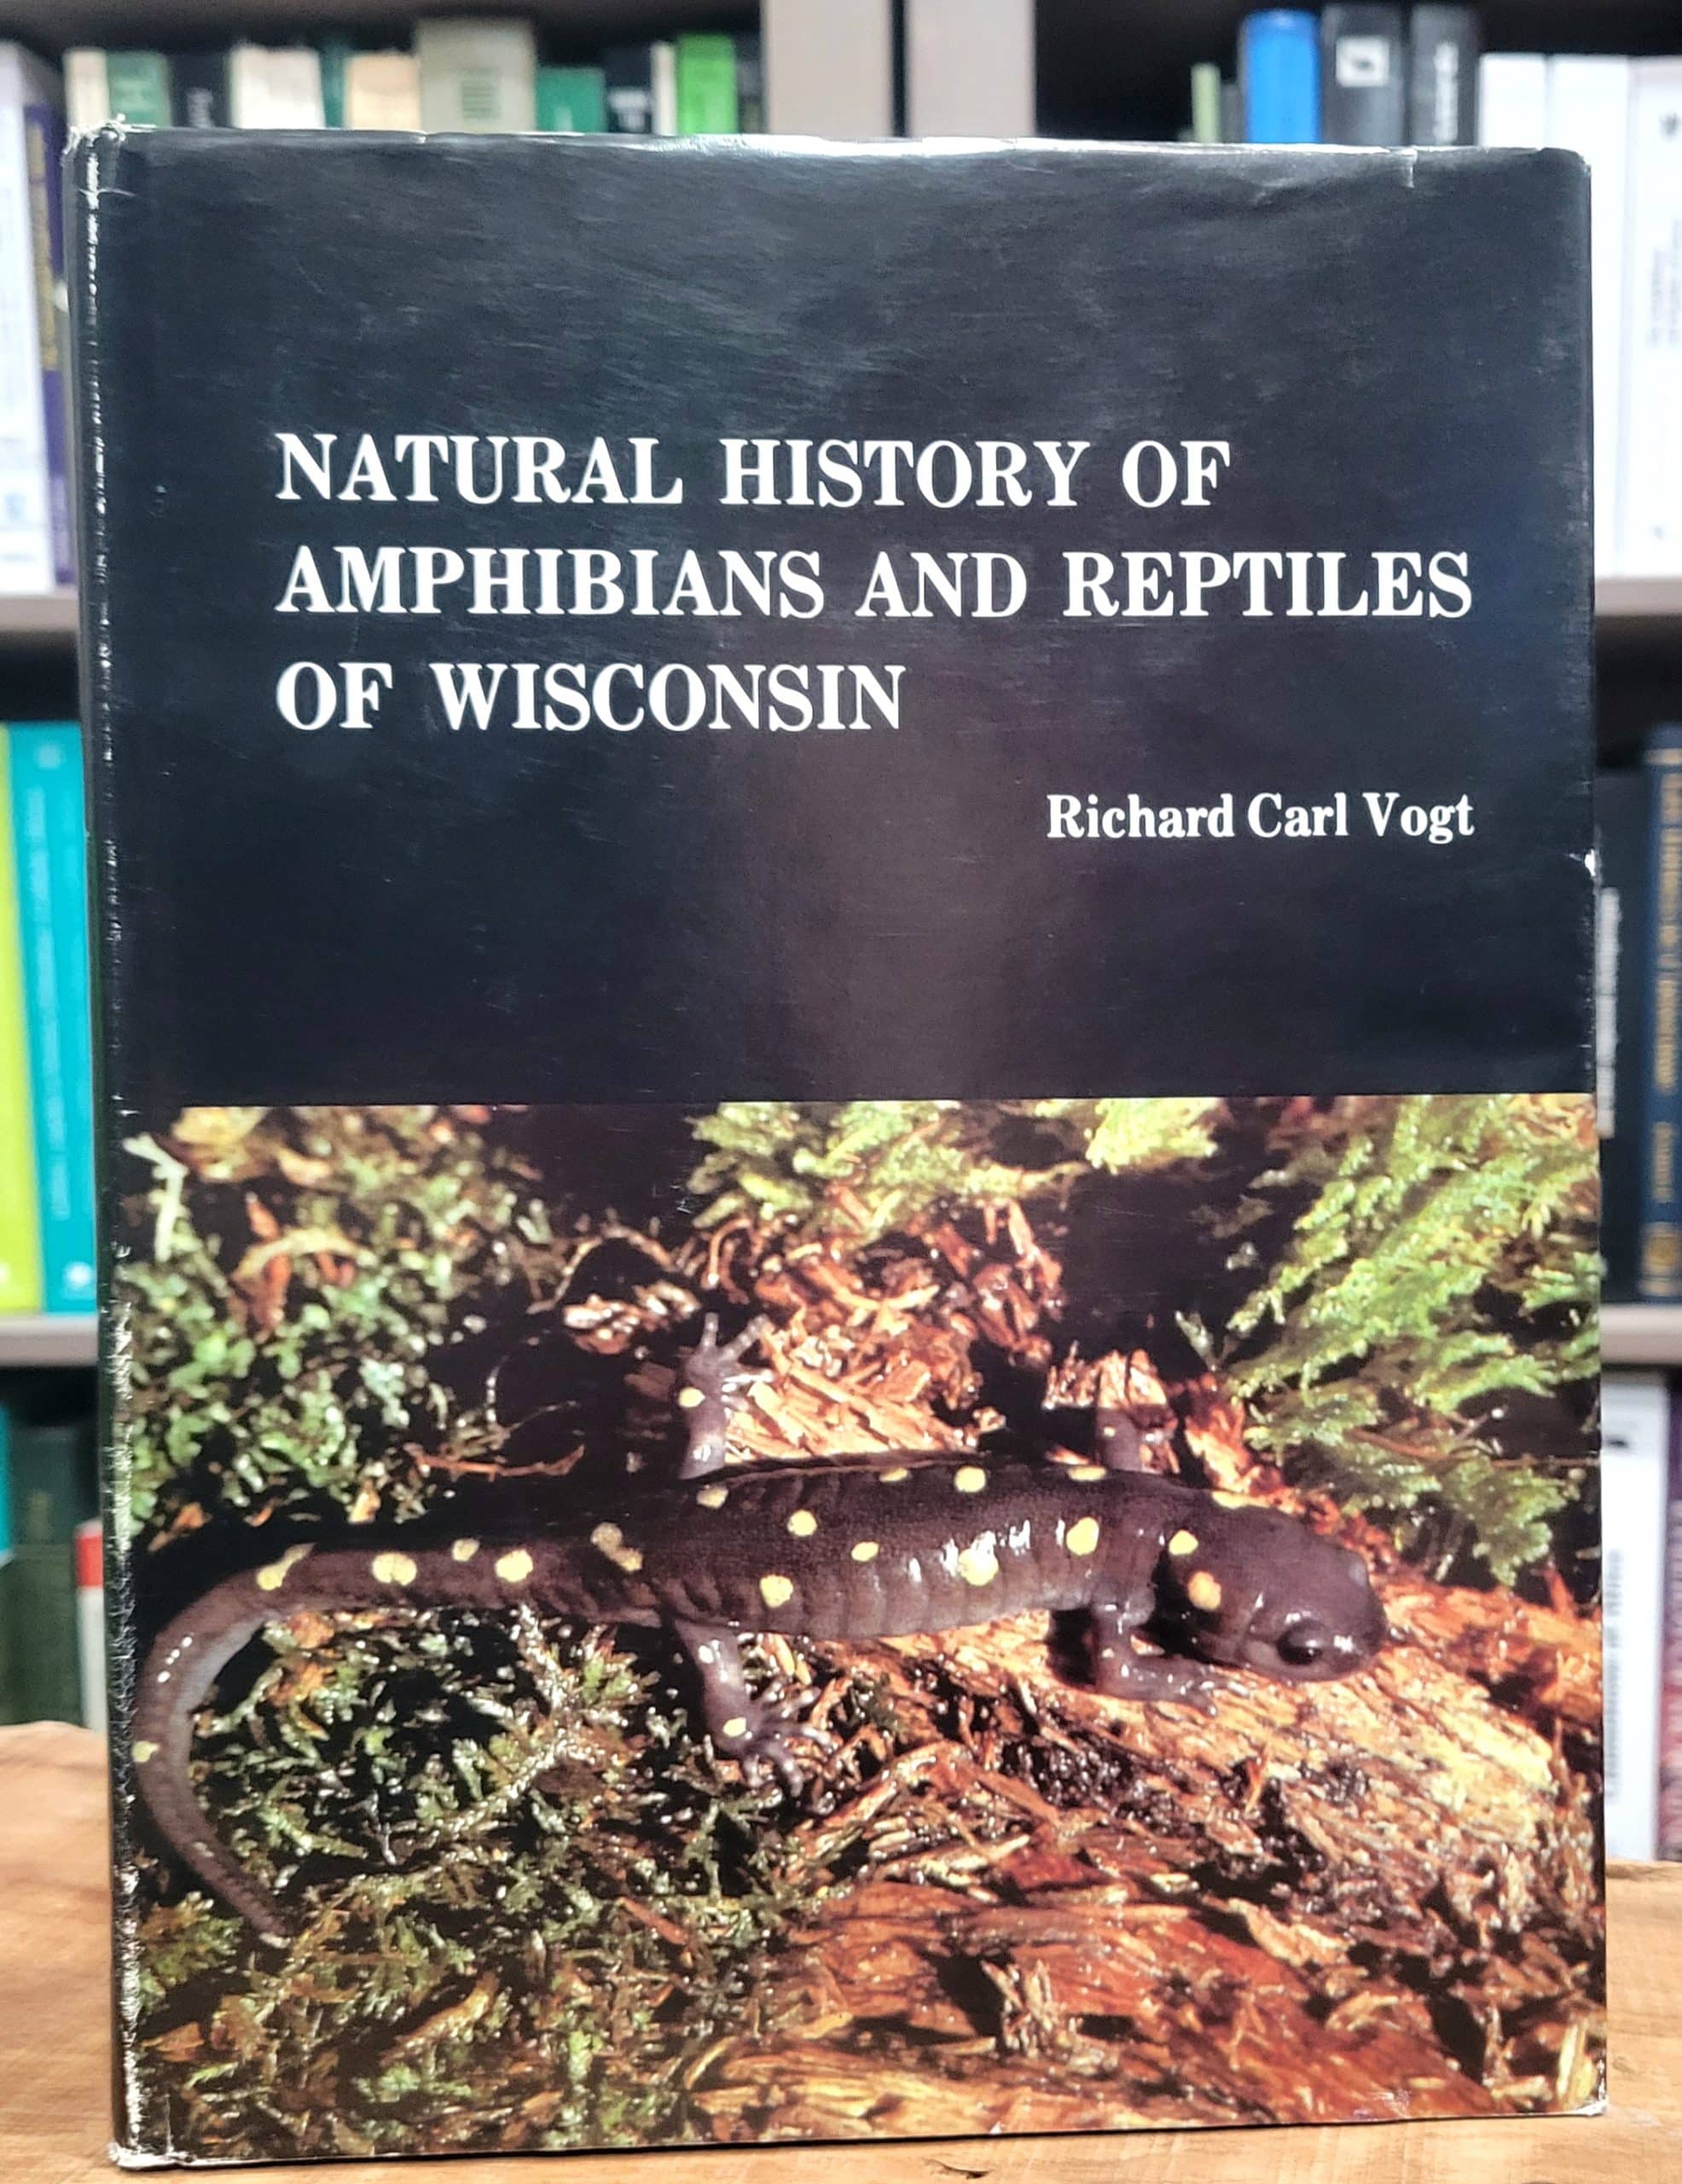 Natural History of Amphibians and Reptiles of Wisconsin